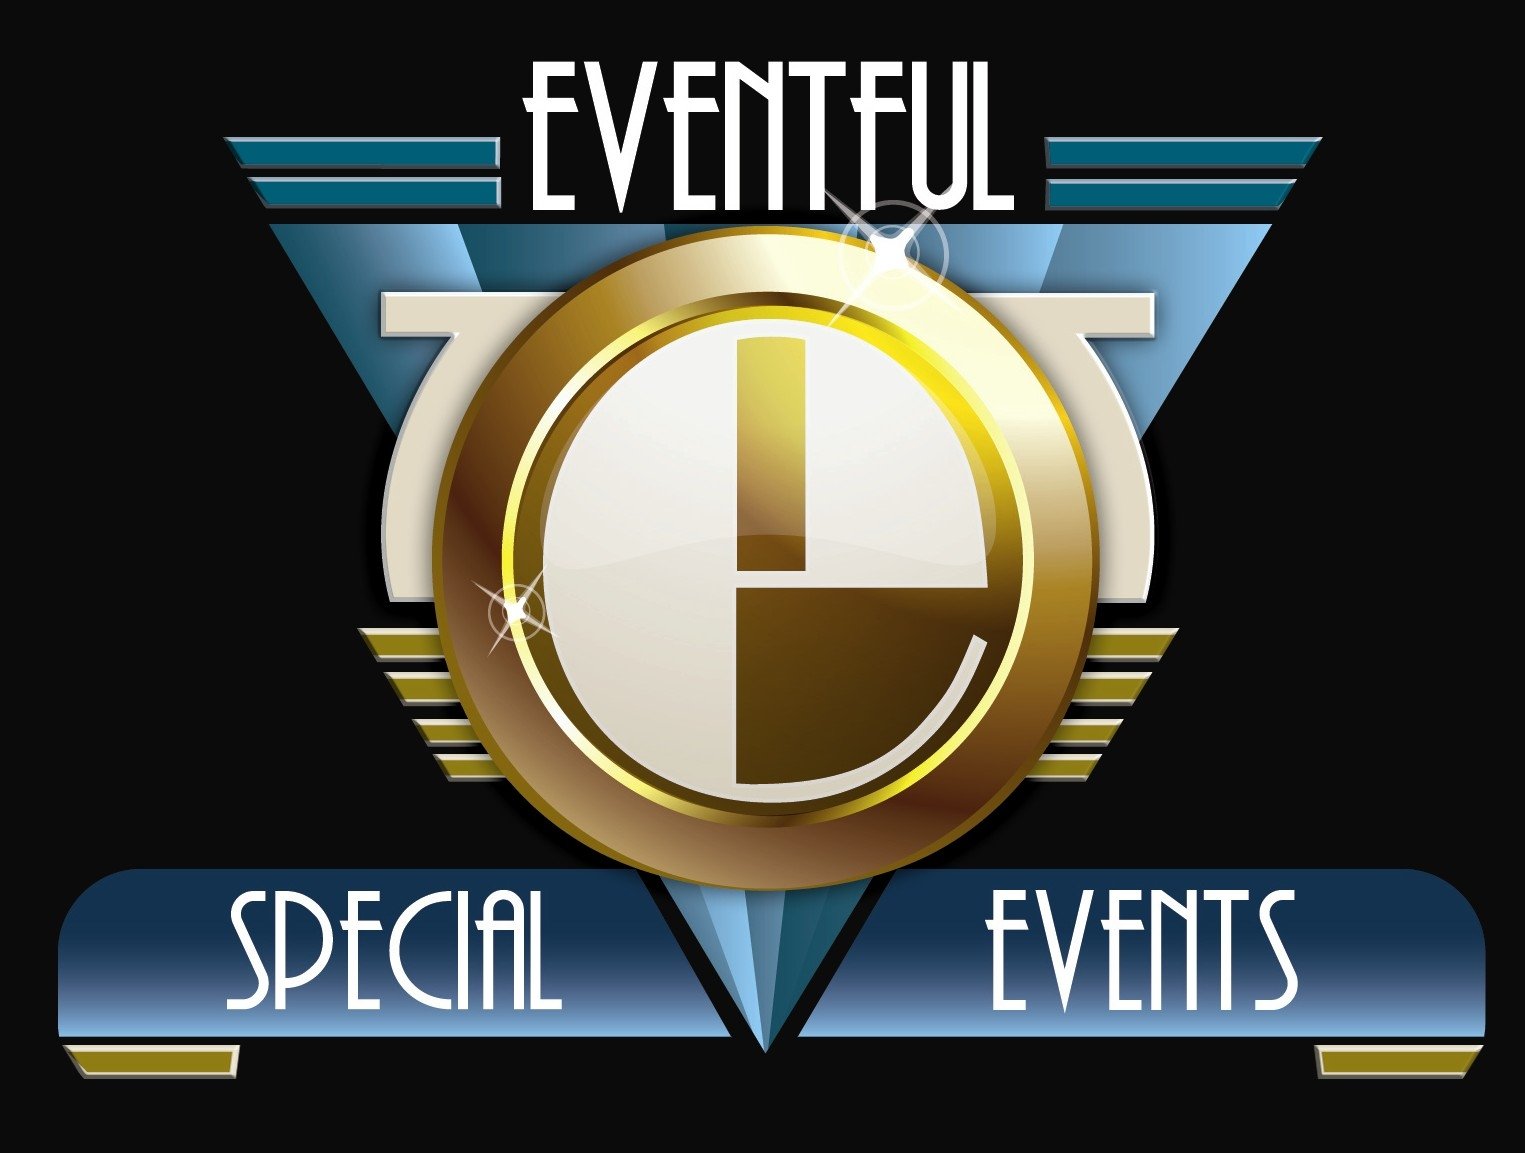 EVENTFUL SPECIAL EVENTS PTY LTD